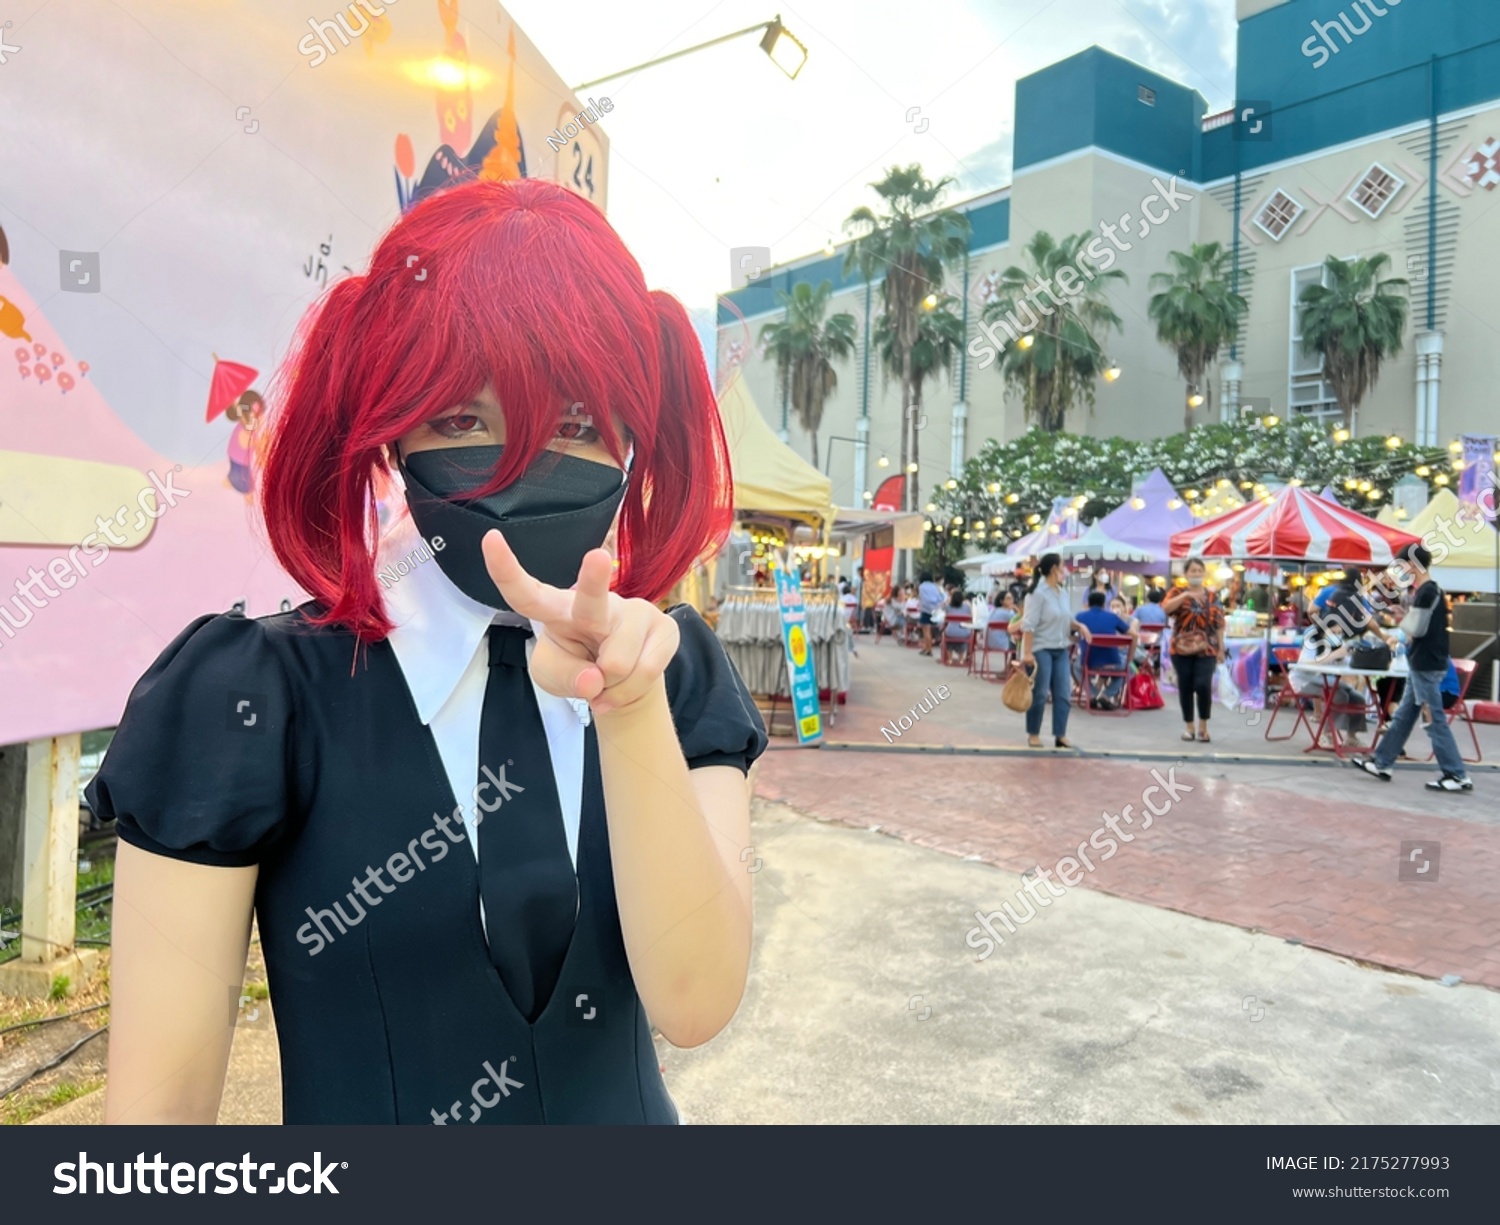 cute Japan anime cosplay, portrait of a girl with the red beryl comic costume, a cosplay girl with red wig and black mask. #2175277993